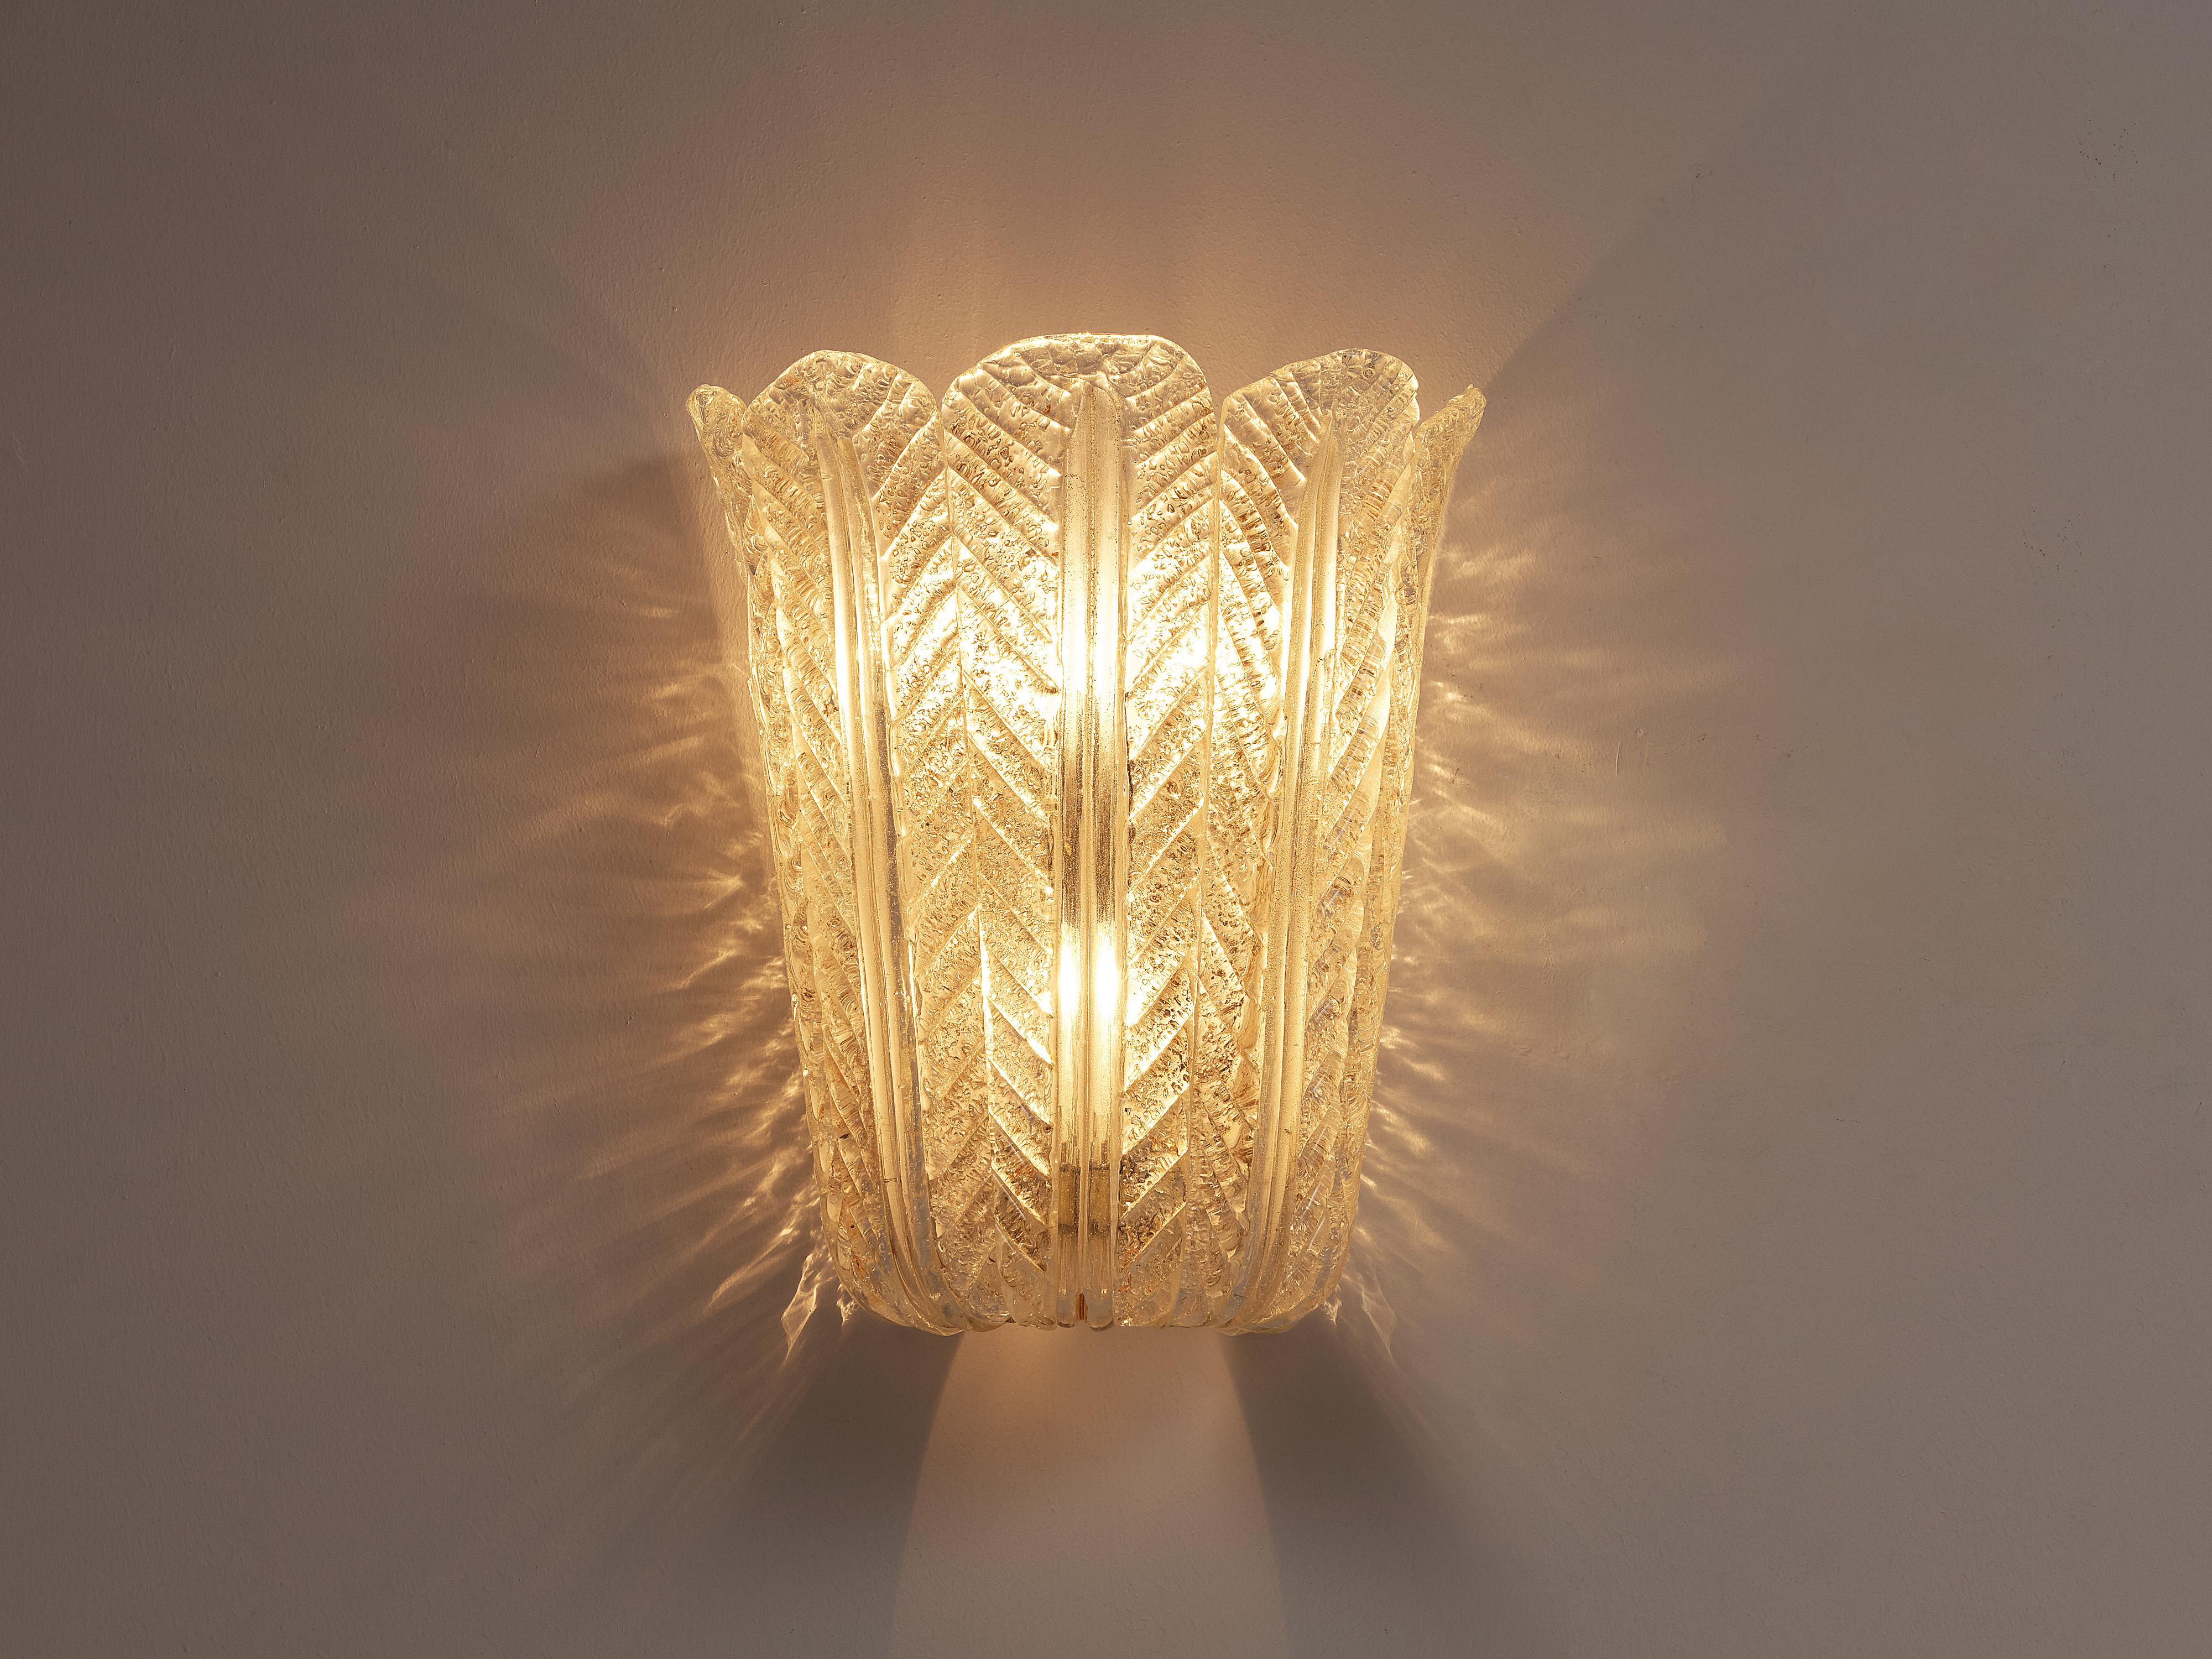 Italian wall light, structured glass, gold leaf, steel,  Italy, 1950s

This wonderful wall lamp bears strong resemblance to the designs of Venini. In the same style of the famous Italian glass and lamp manufacturer, this single wall lamp consists of